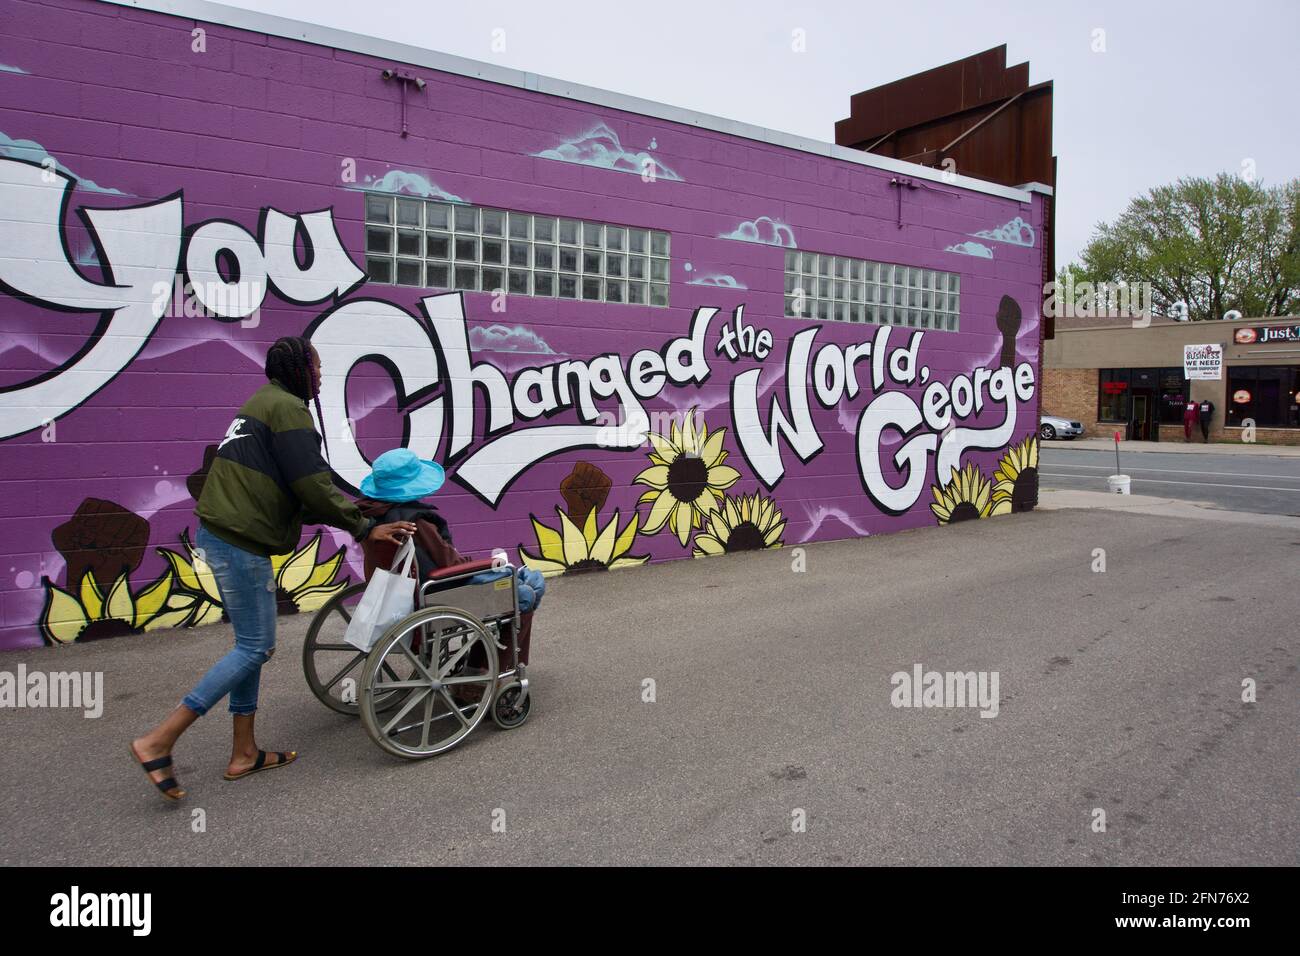 Woman pushing another in a wheelchair at George Floyd Square in front of a mural that says 'You Changed The World, George'. Minneapolis, MN, USA Stock Photo